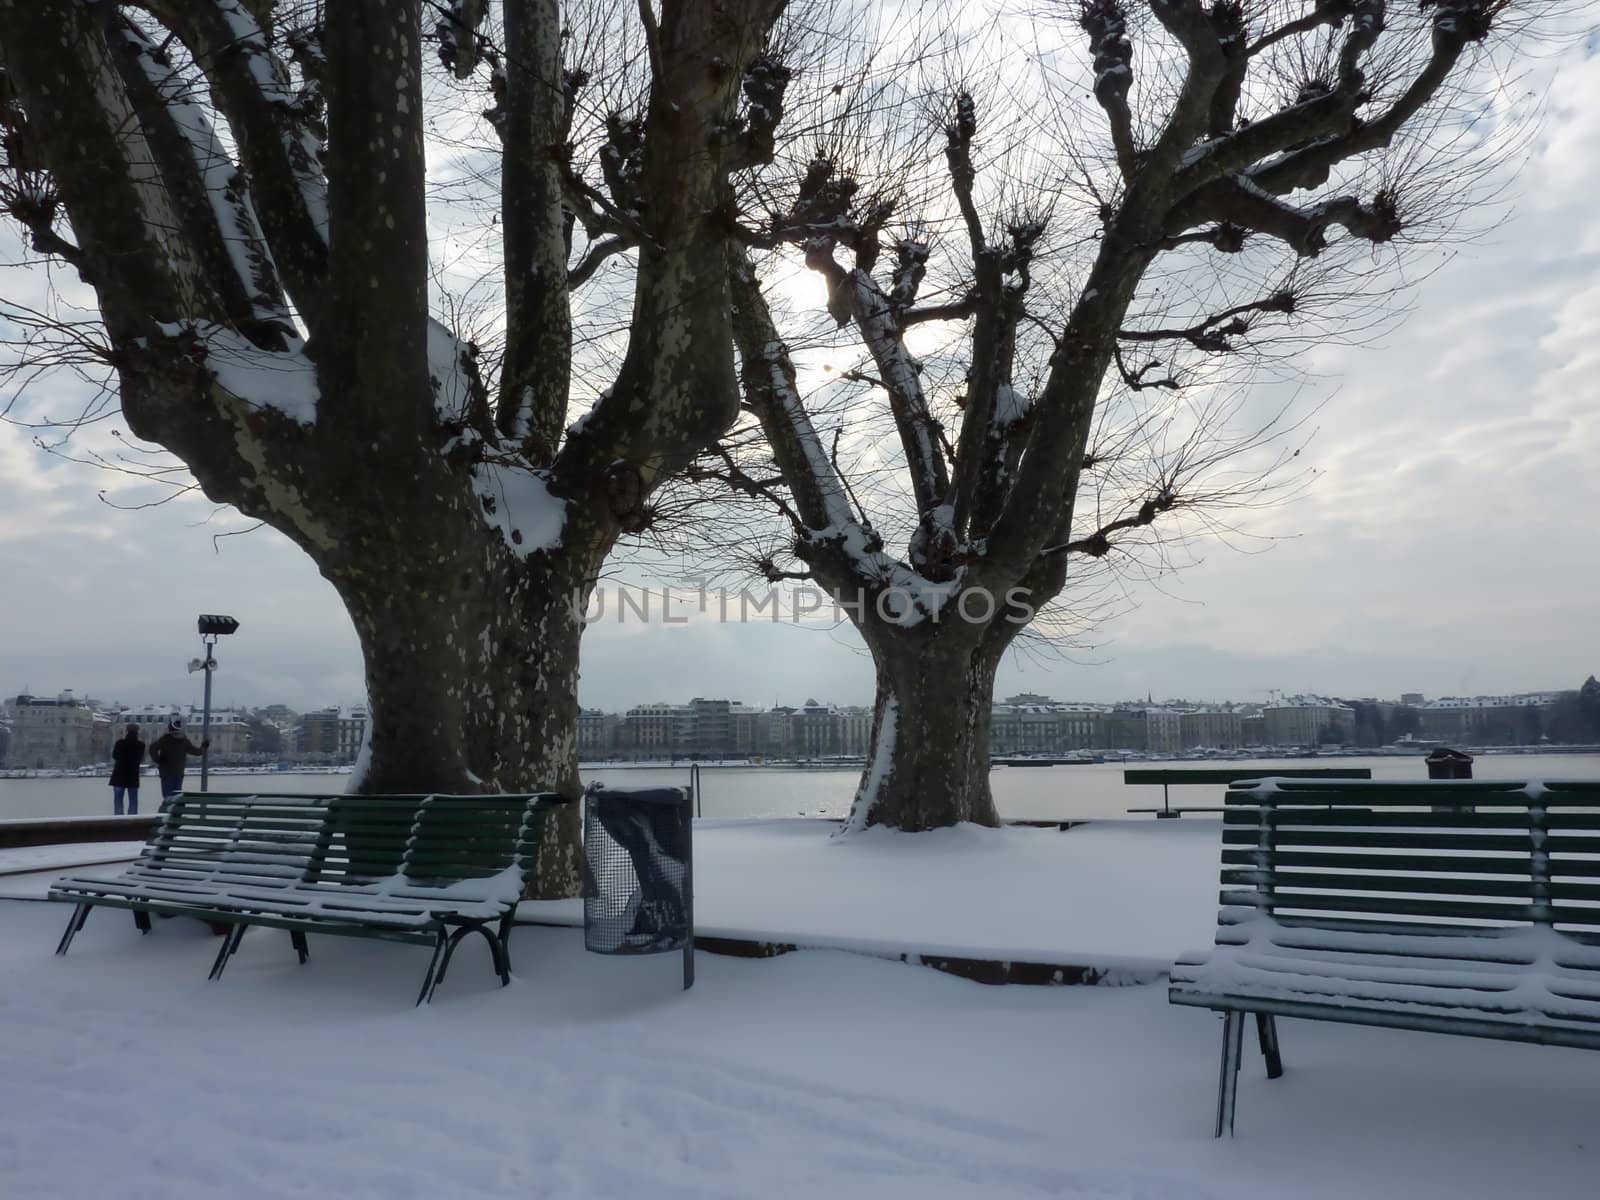 Park with chestnut trees and benches by winter